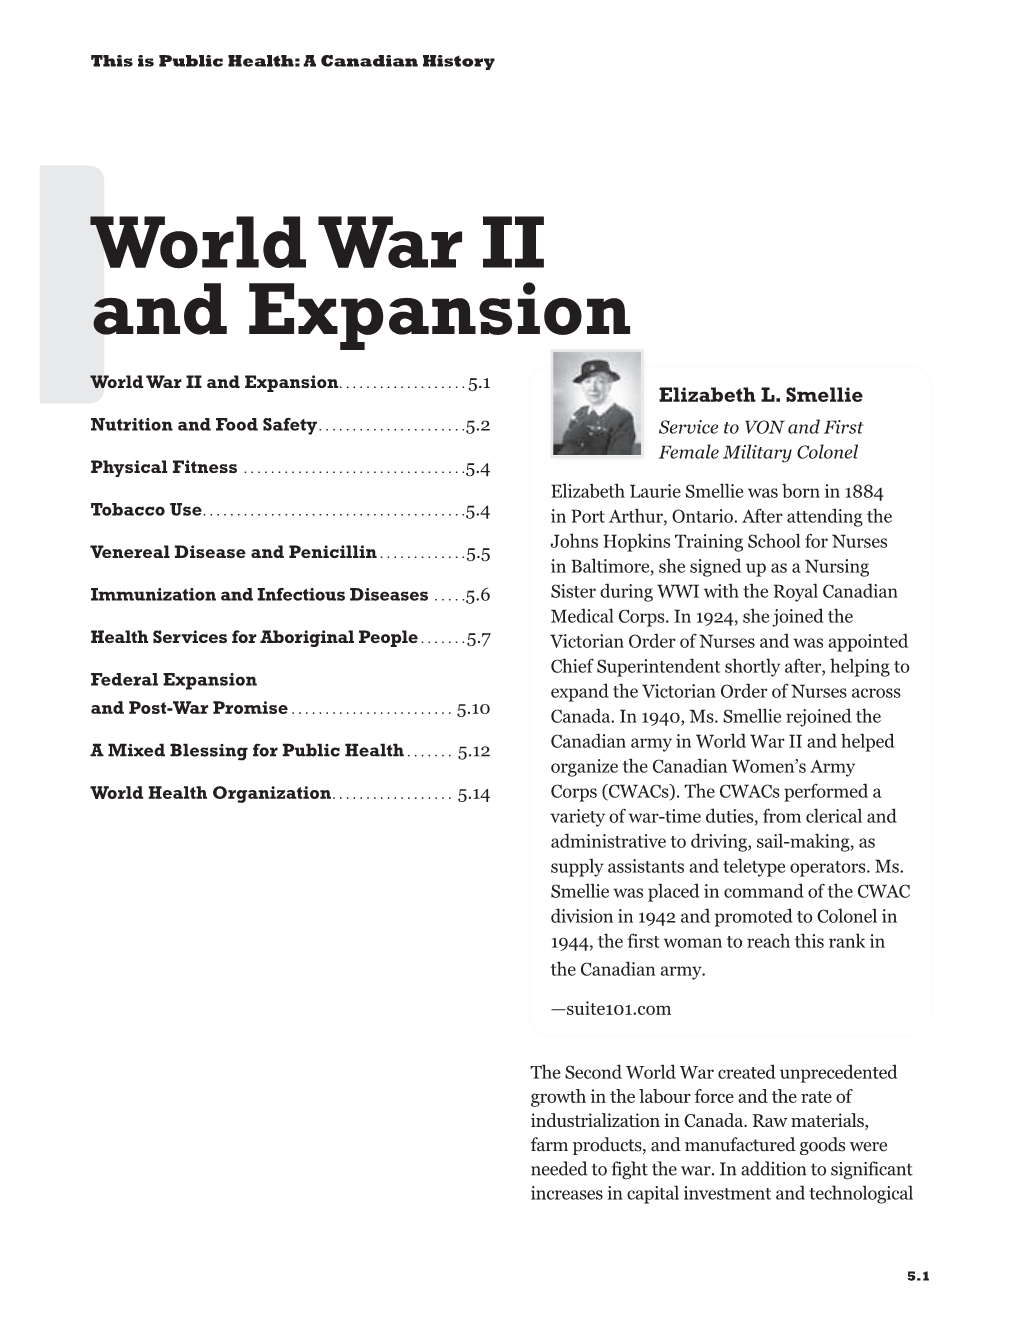 World War II and Expansion